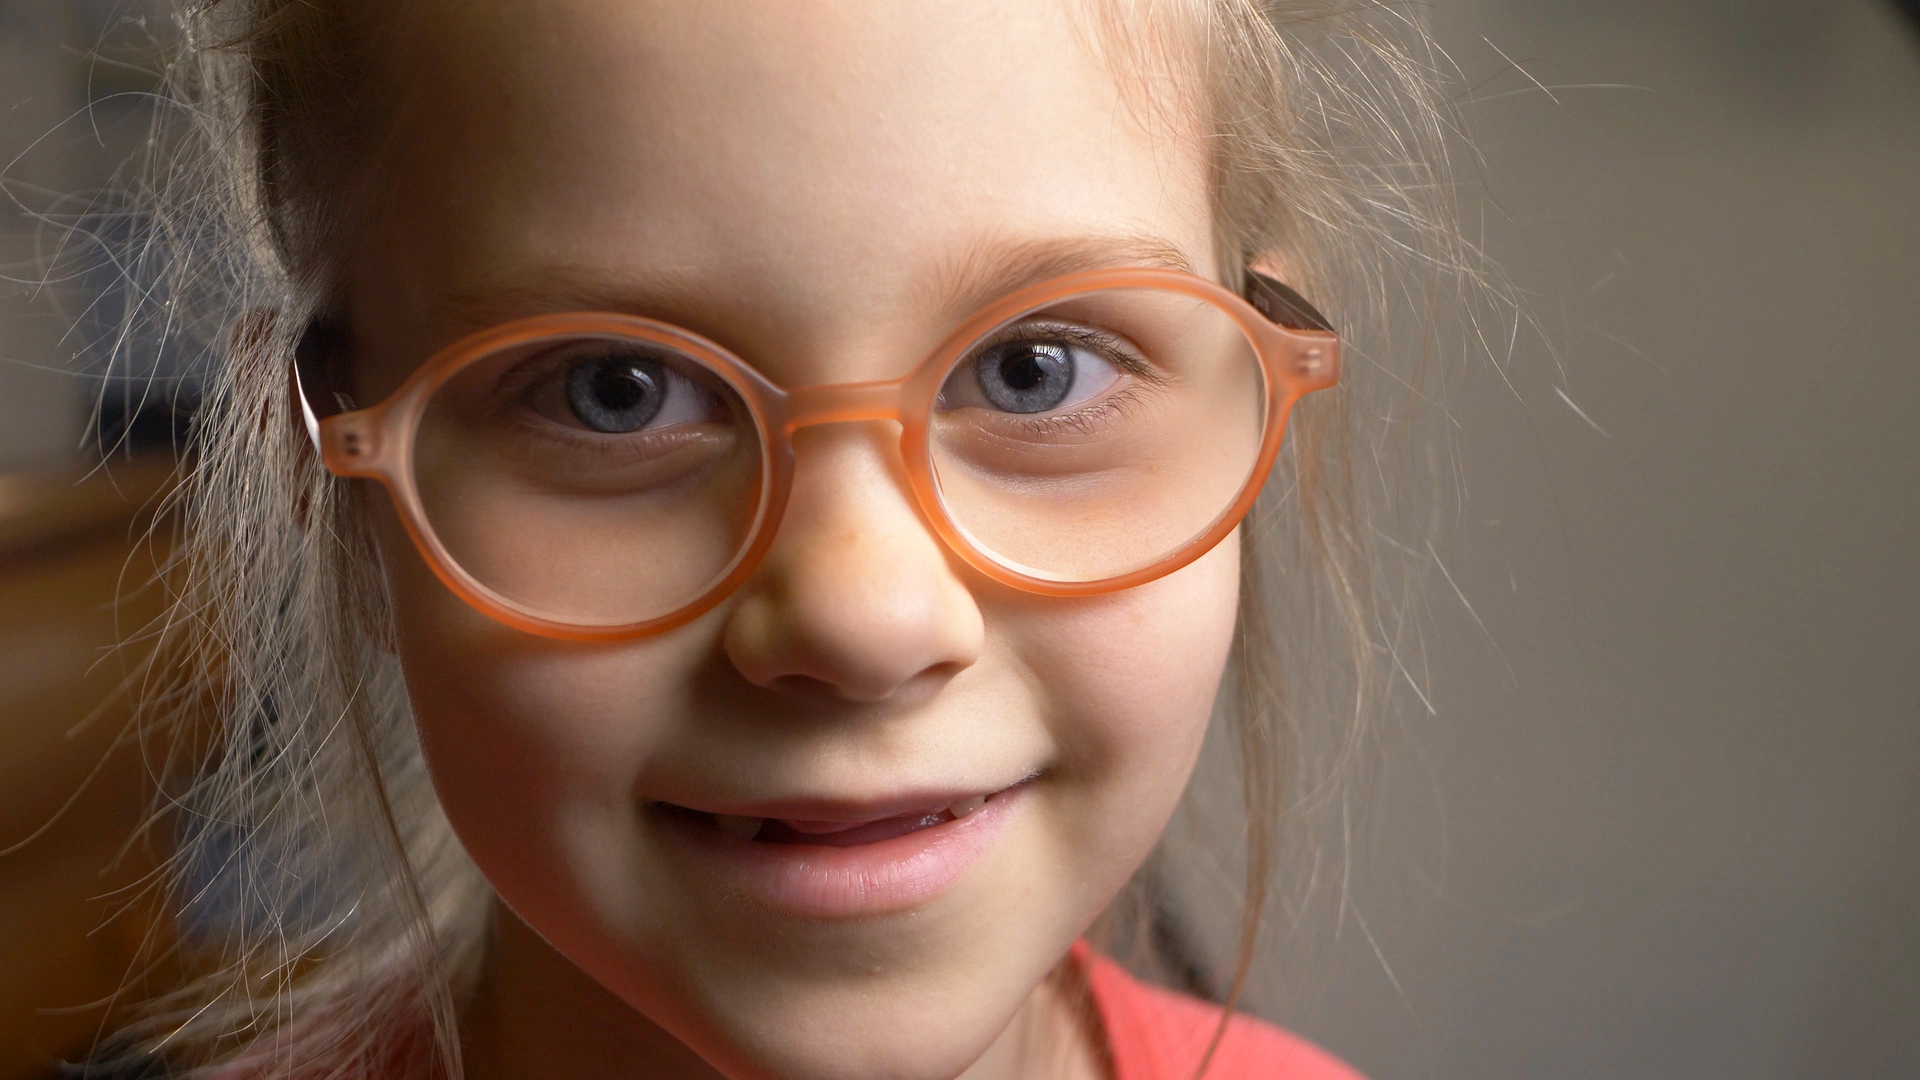 A young girl smiles into the camera, she is wearing round orange glasses and has a gappy smile where she has lost her milk teeth